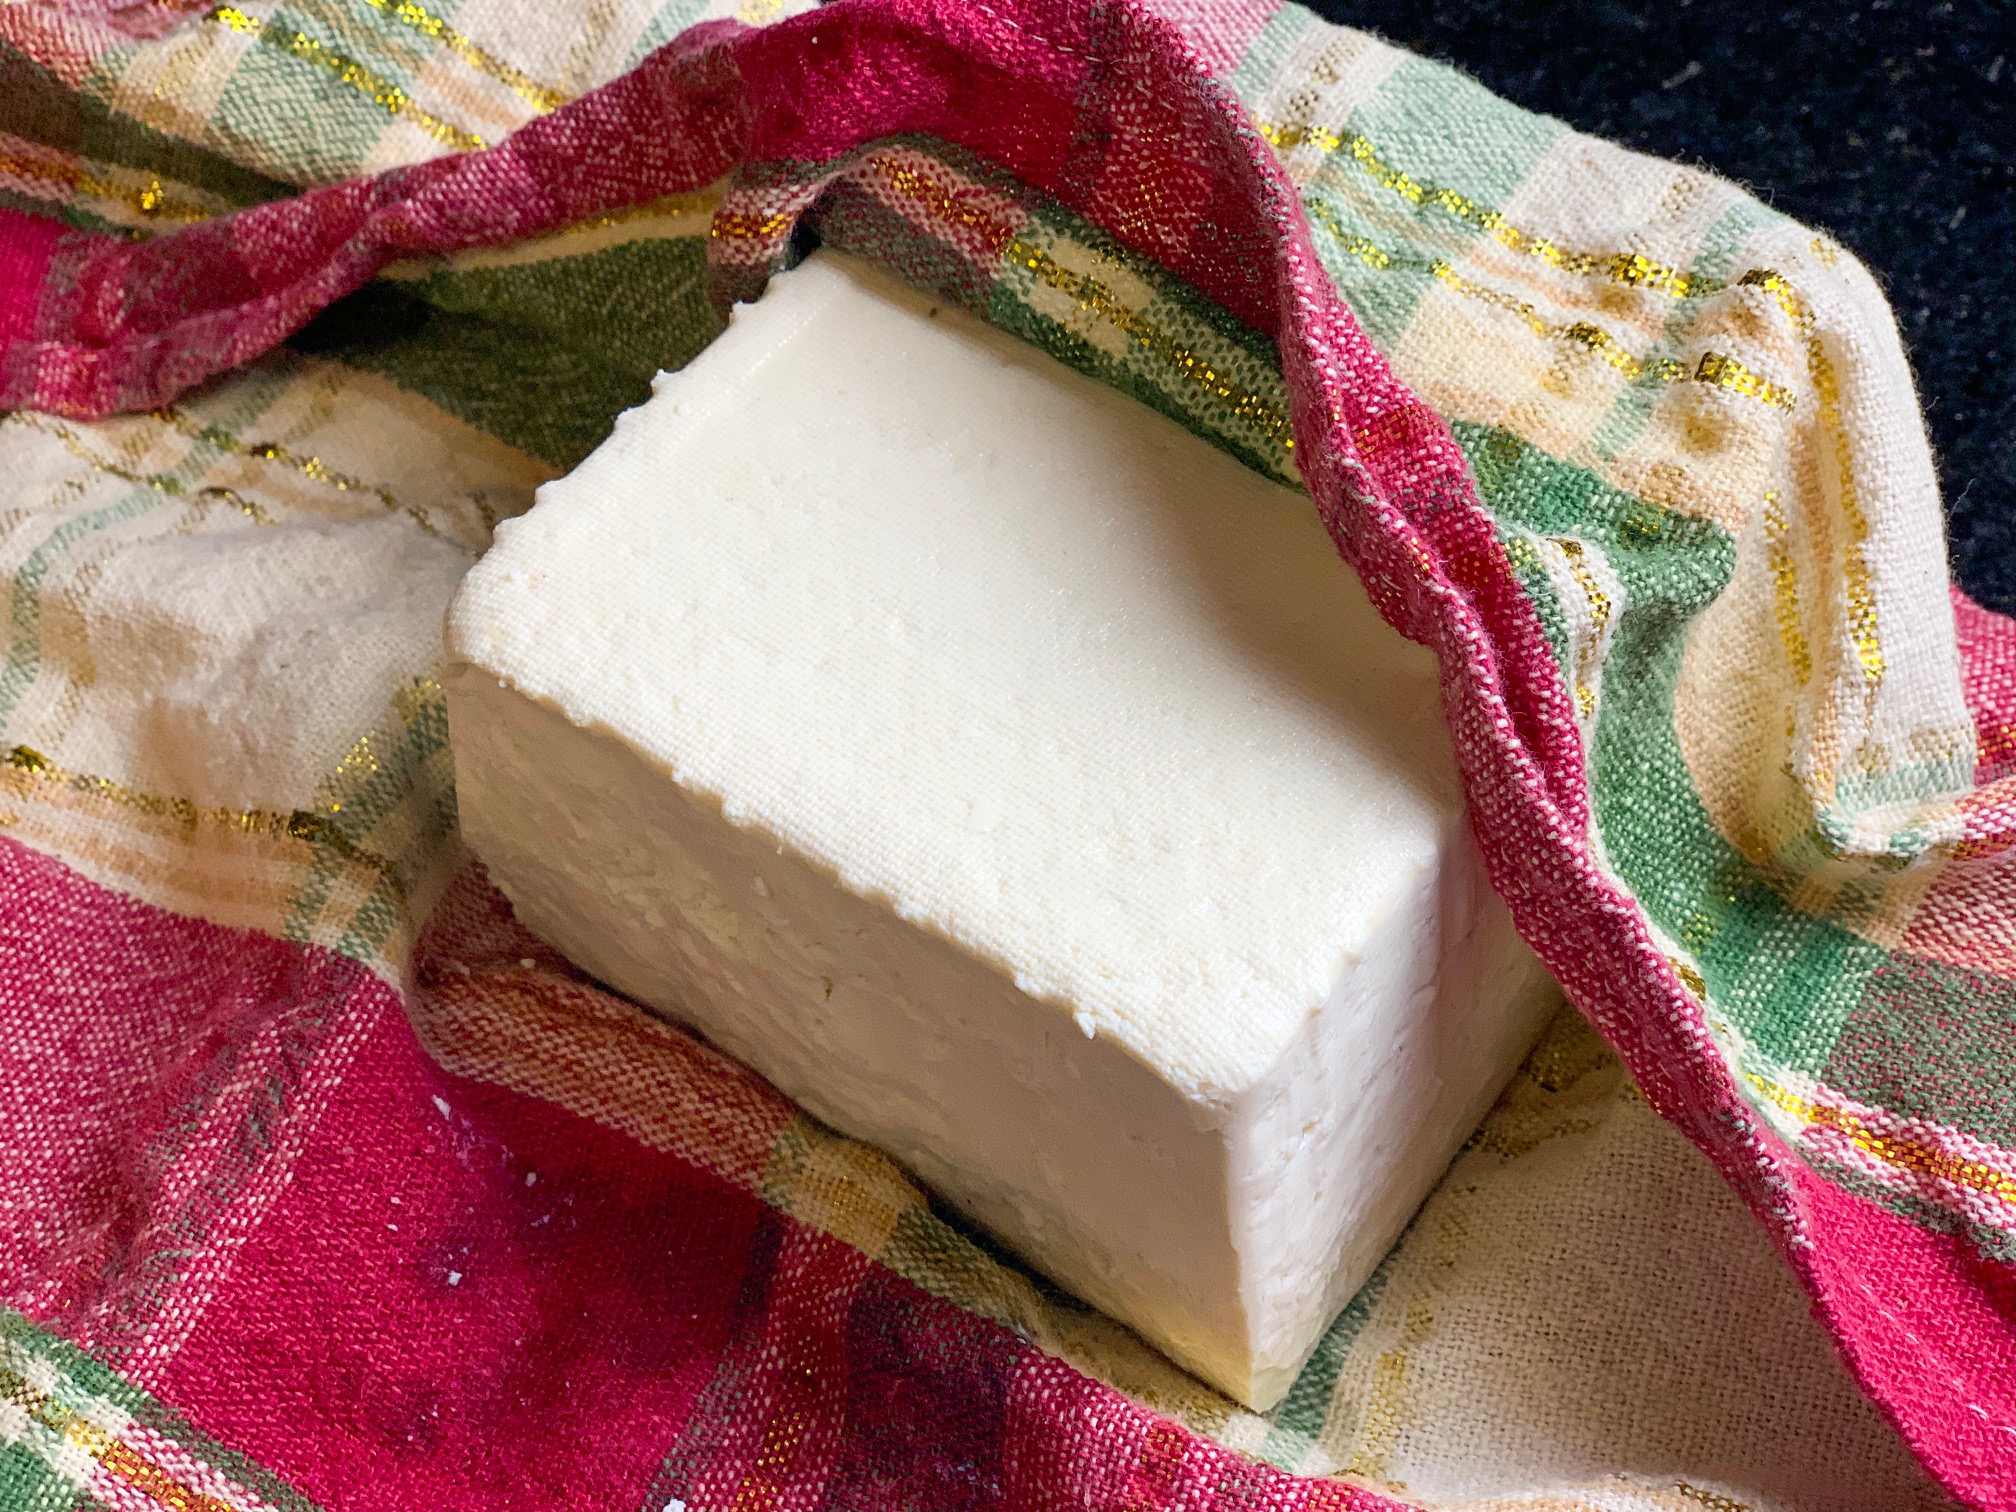 draining tofu in a towel ready for prep